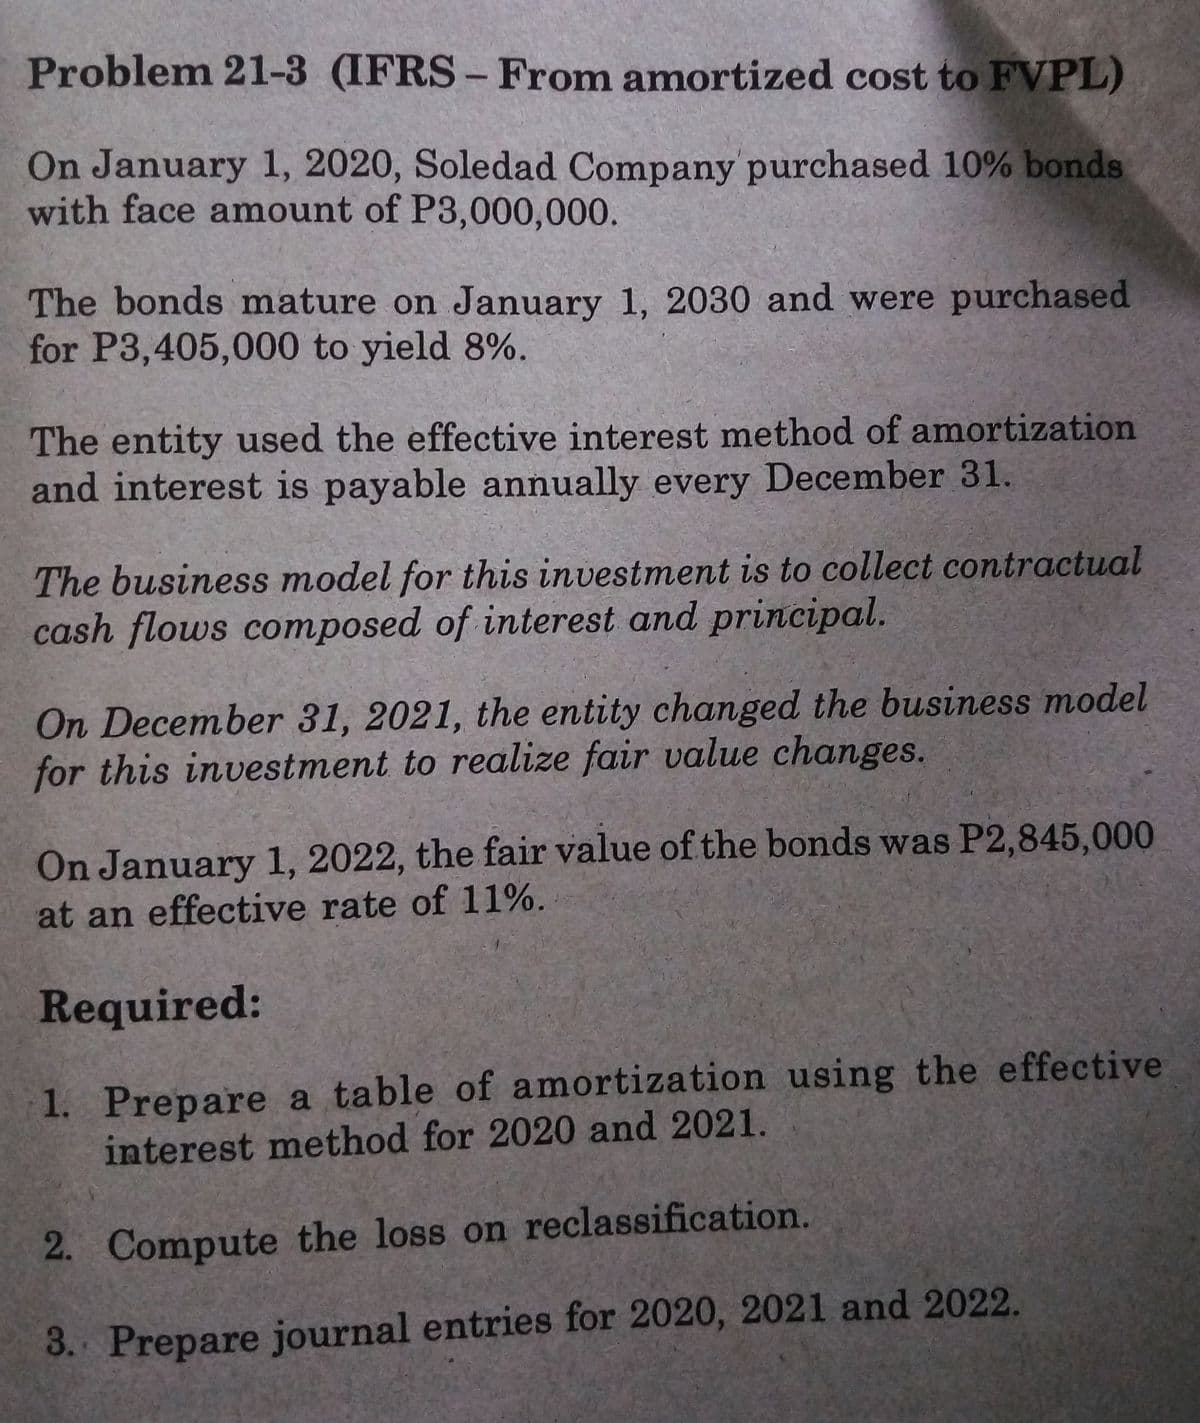 Problem 21-3 (IFRS- From amortized cost to FVPL)
On January 1, 2020, Soledad Company purchased 10% bonds
with face amount of P3,000,000.
The bonds mature on January 1, 2030 and were purchased
for P3,405,000 to yield 8%.
The entity used the effective interest method of amortization
and interest is payable annually every December 31.
The business model for this investment is to collect contractual
cash flows composed of interest and principal.
On December 31, 2021, the entity changed the business model
for this investment to realize fair value changes.
On January 1, 2022, the fair value of the bonds was P2,845,000
at an effective rate of 11%.
Required:
1. Prepare a table of amortization using the effective
interest method for 2020 and 2021.
2. Compute the loss on reclassification.
3. Prepare journal entries for 2020, 2021 and 2022.
